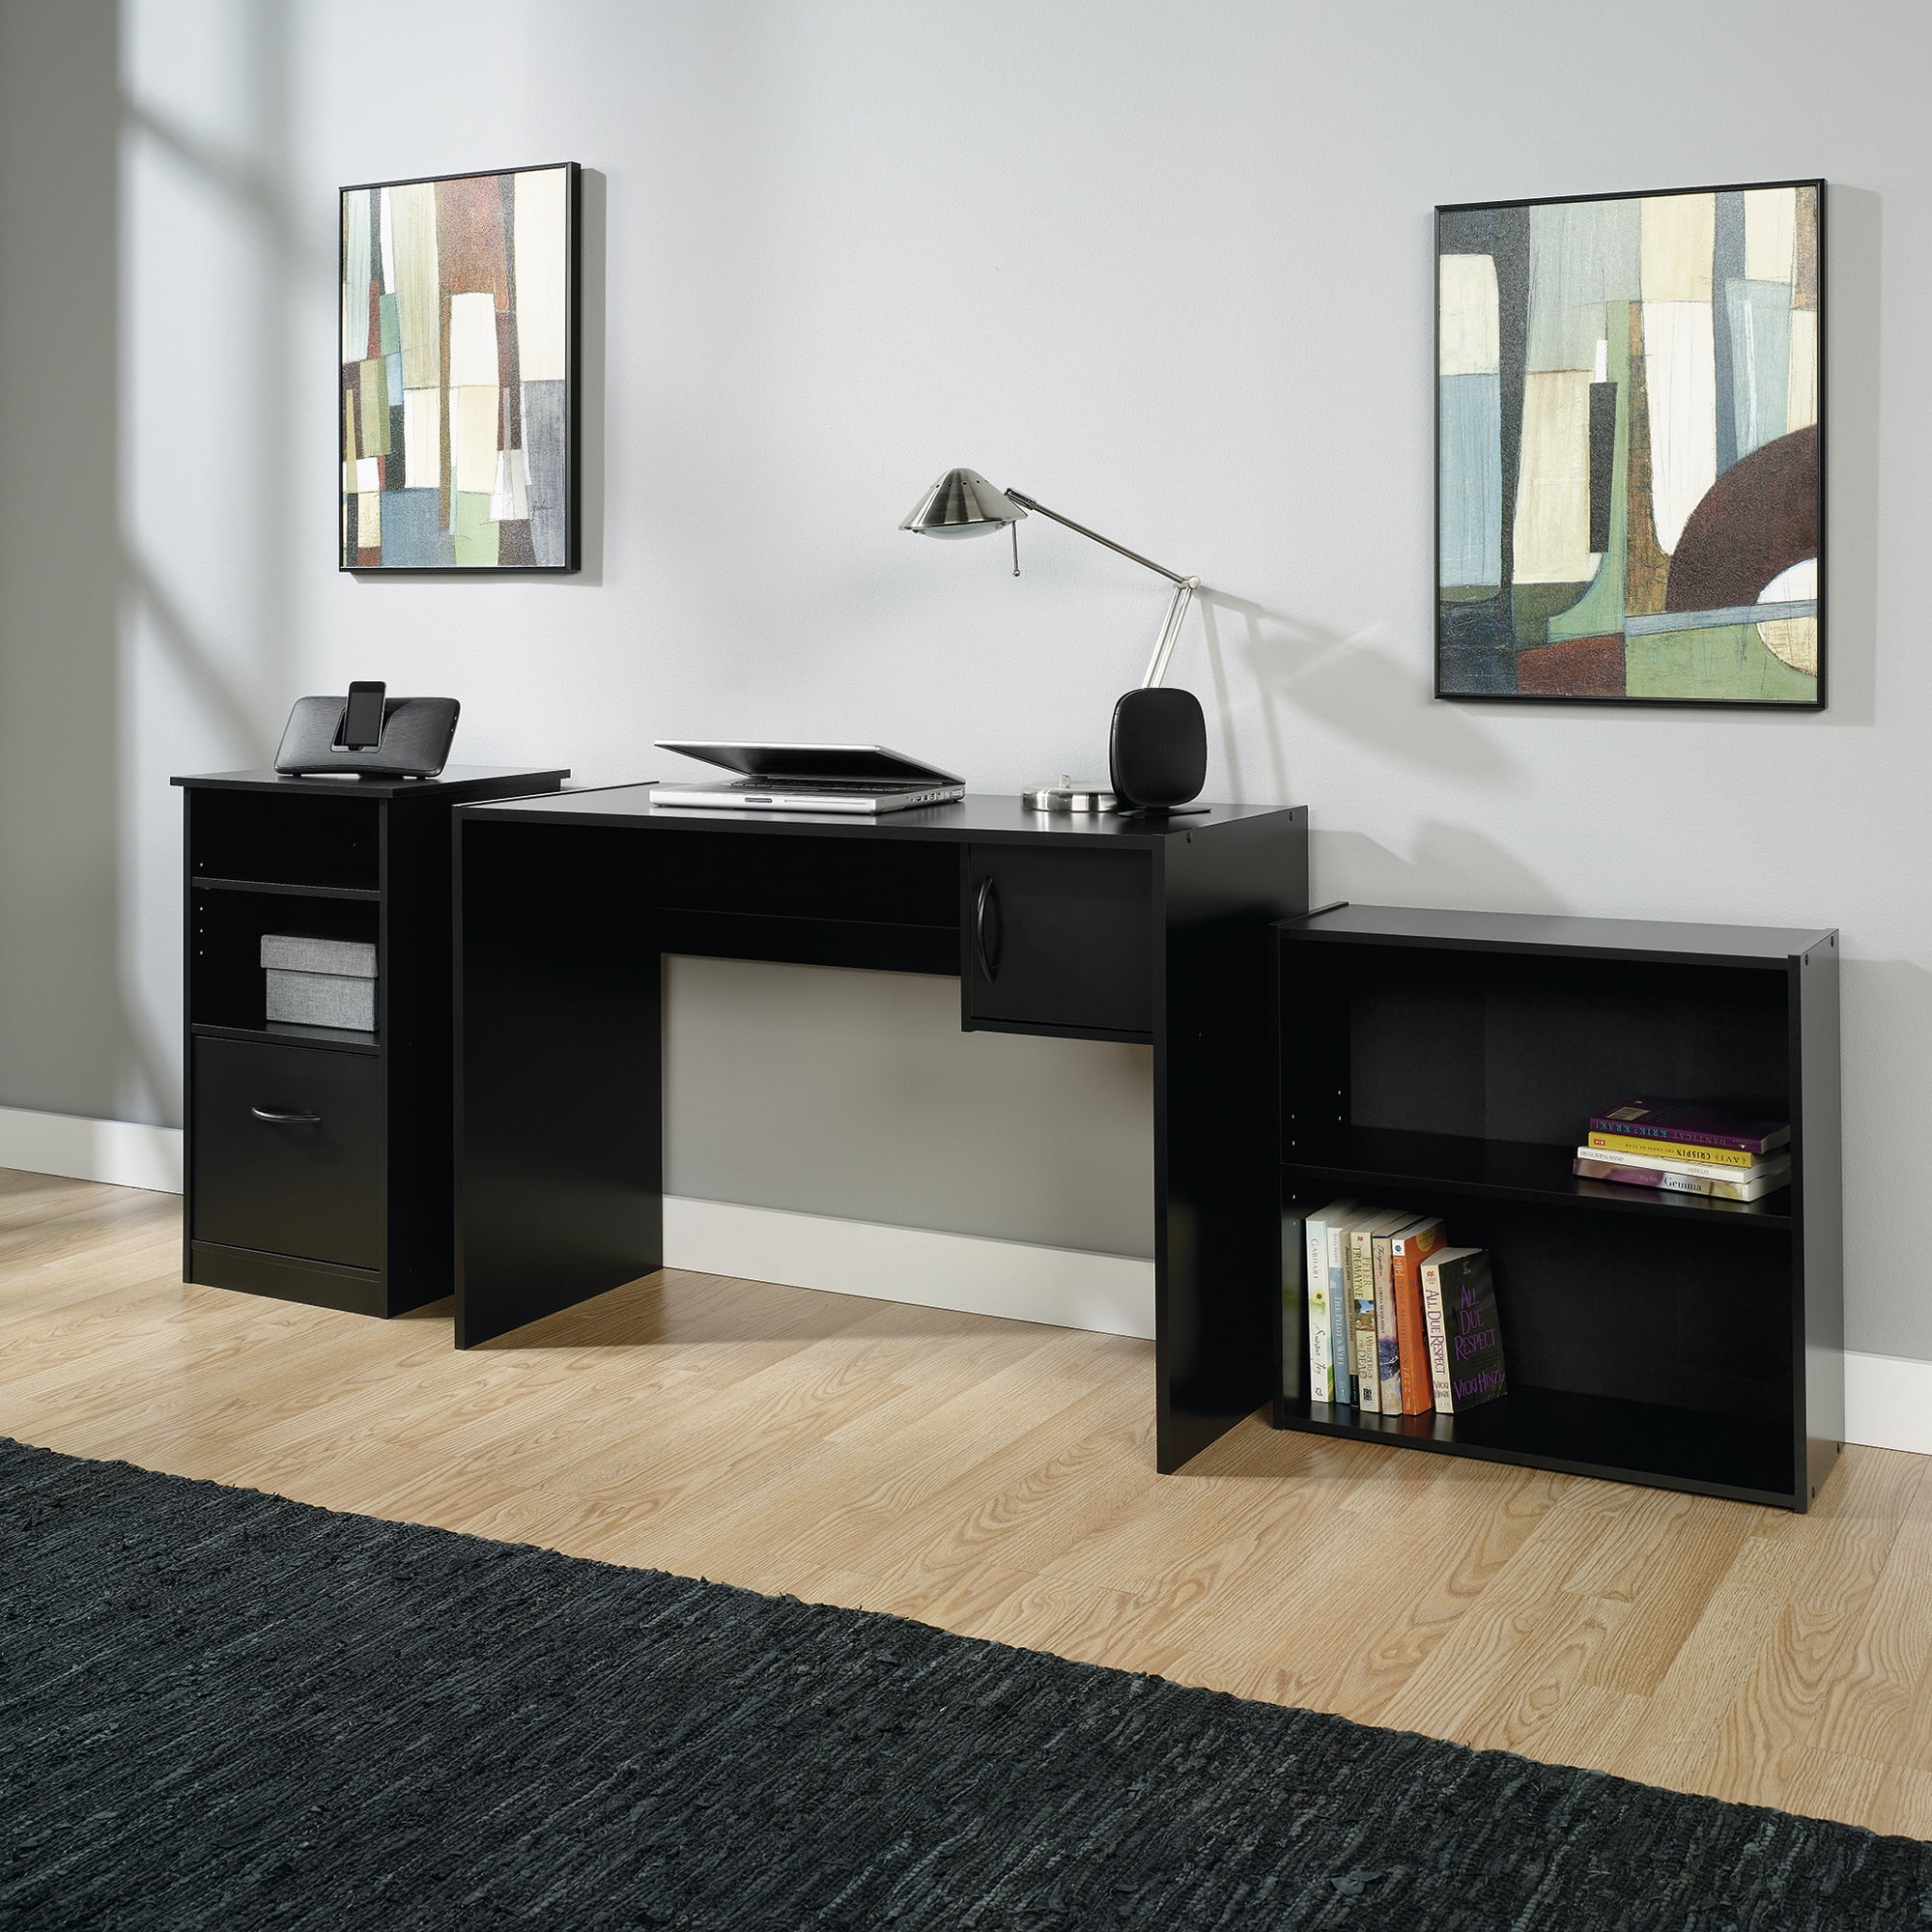 Mainstays 3 Piece Desk And Bookcase Office Set